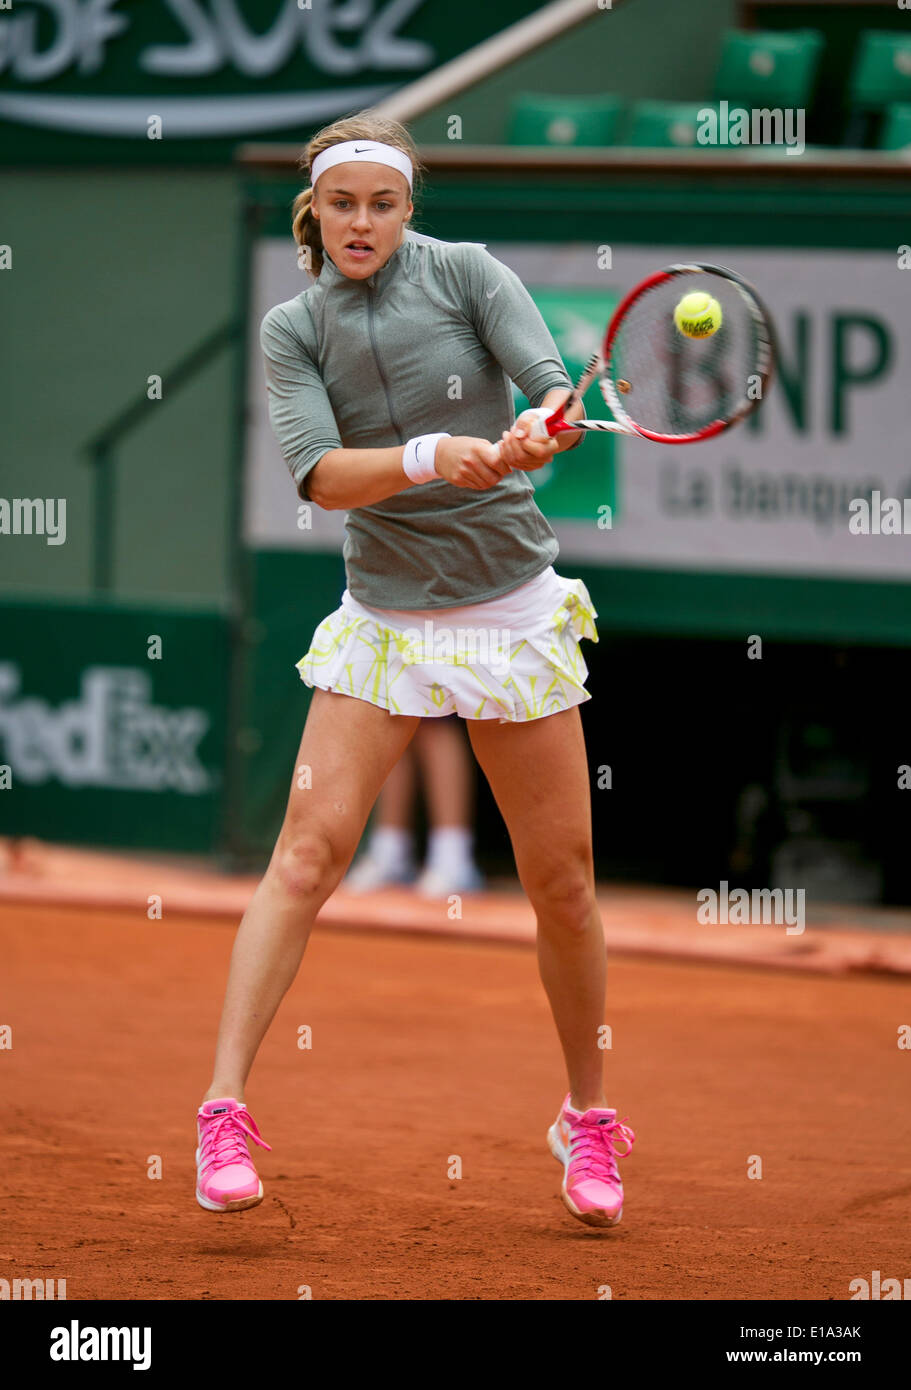 Paris, France. 28th May 2014. Tennis, French Open, Roland Garros, Anna Schmiedlova (SVK) Photo:Tennisimages/Henk Koster/Alamy Live News  Stock Photo